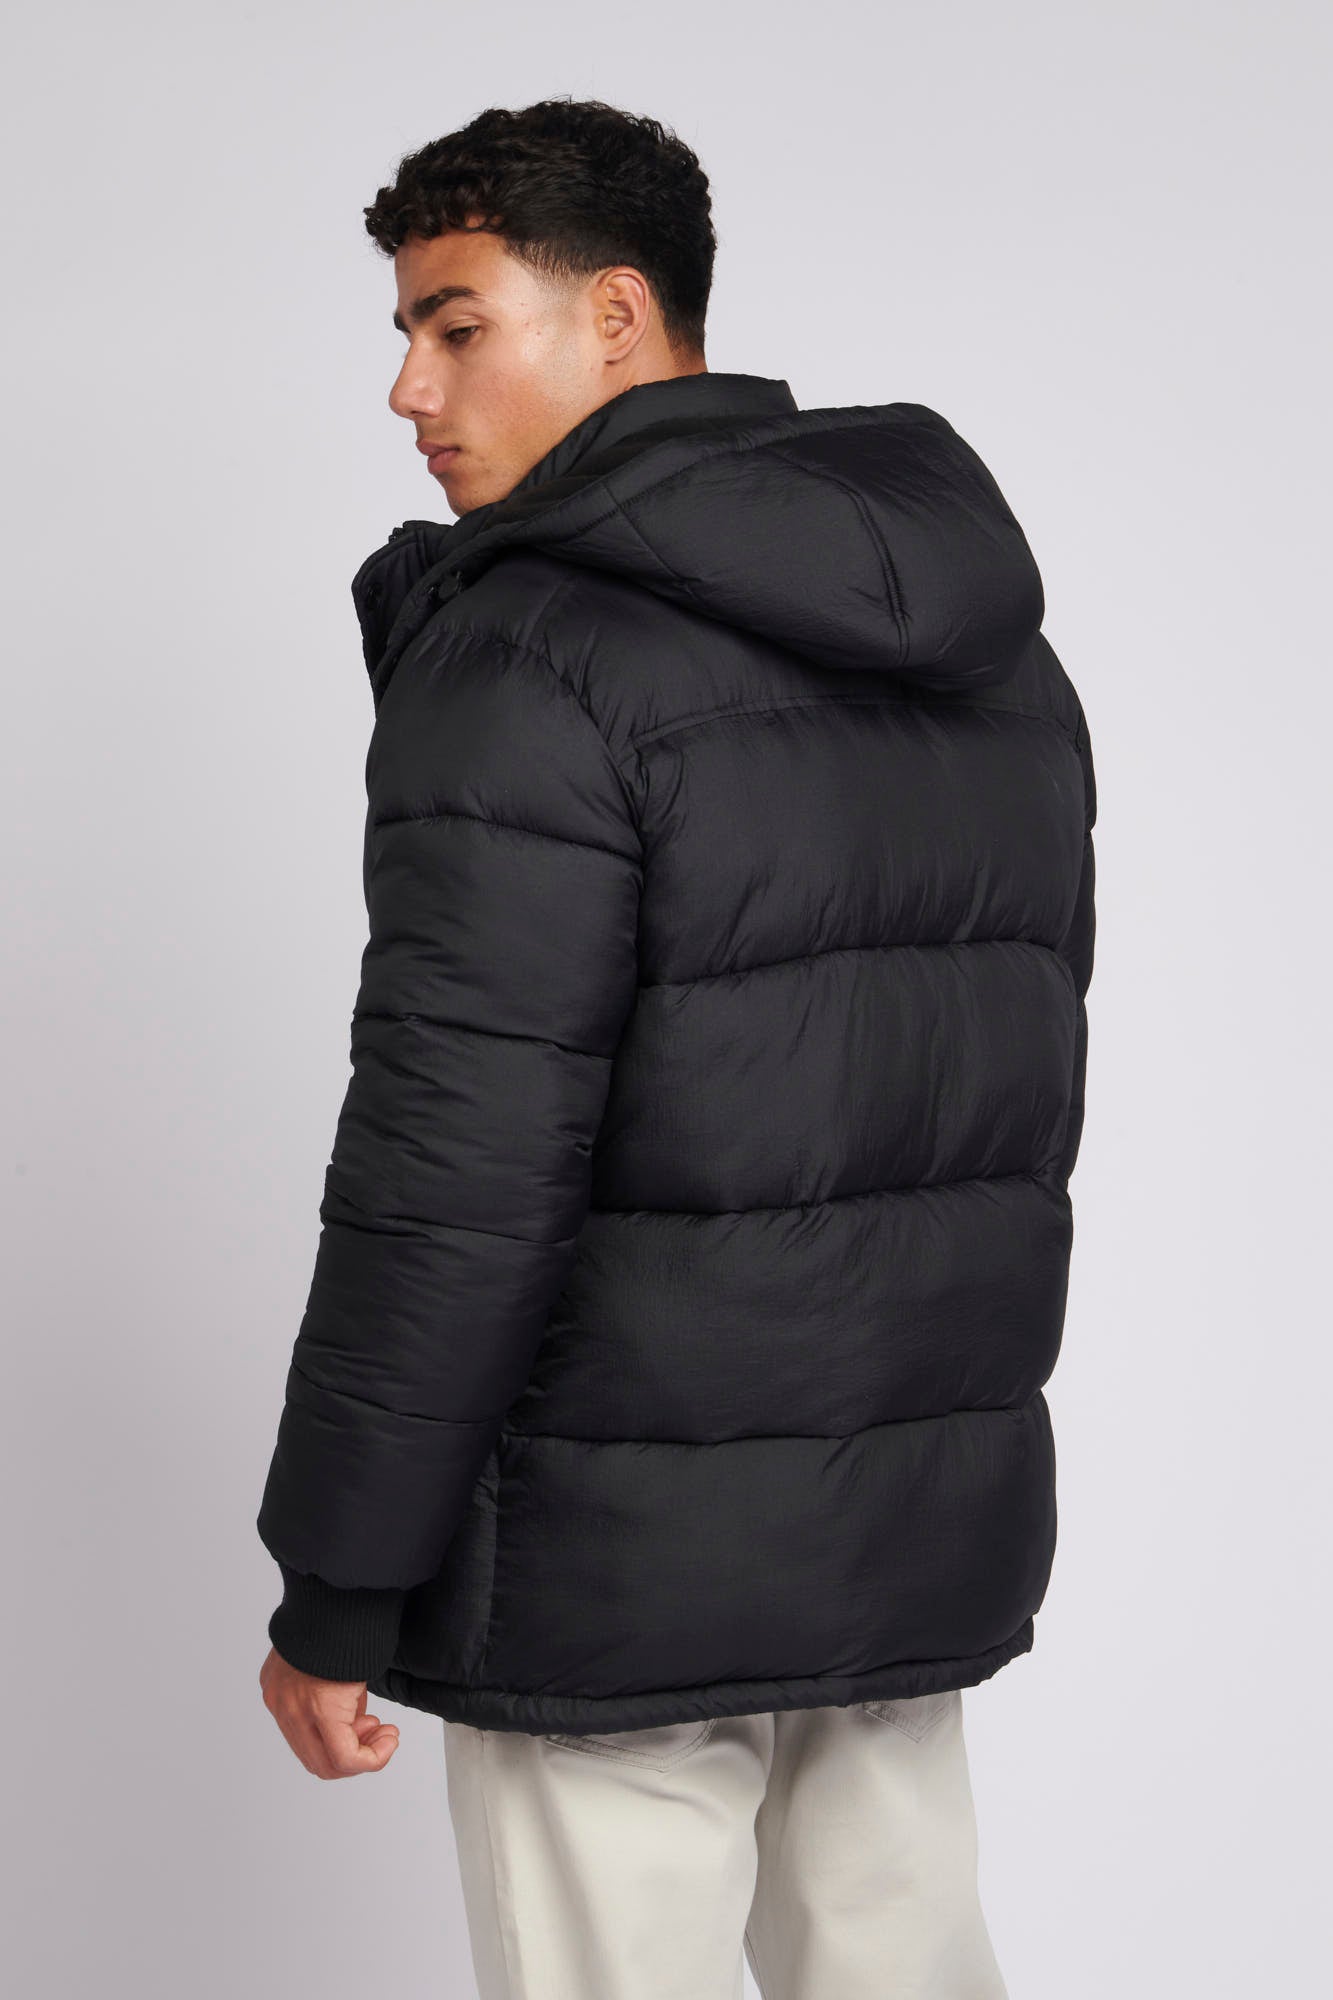 U.S. Polo Assn. Mens Hooded Quilted Puffer Coat in Black – U.S.